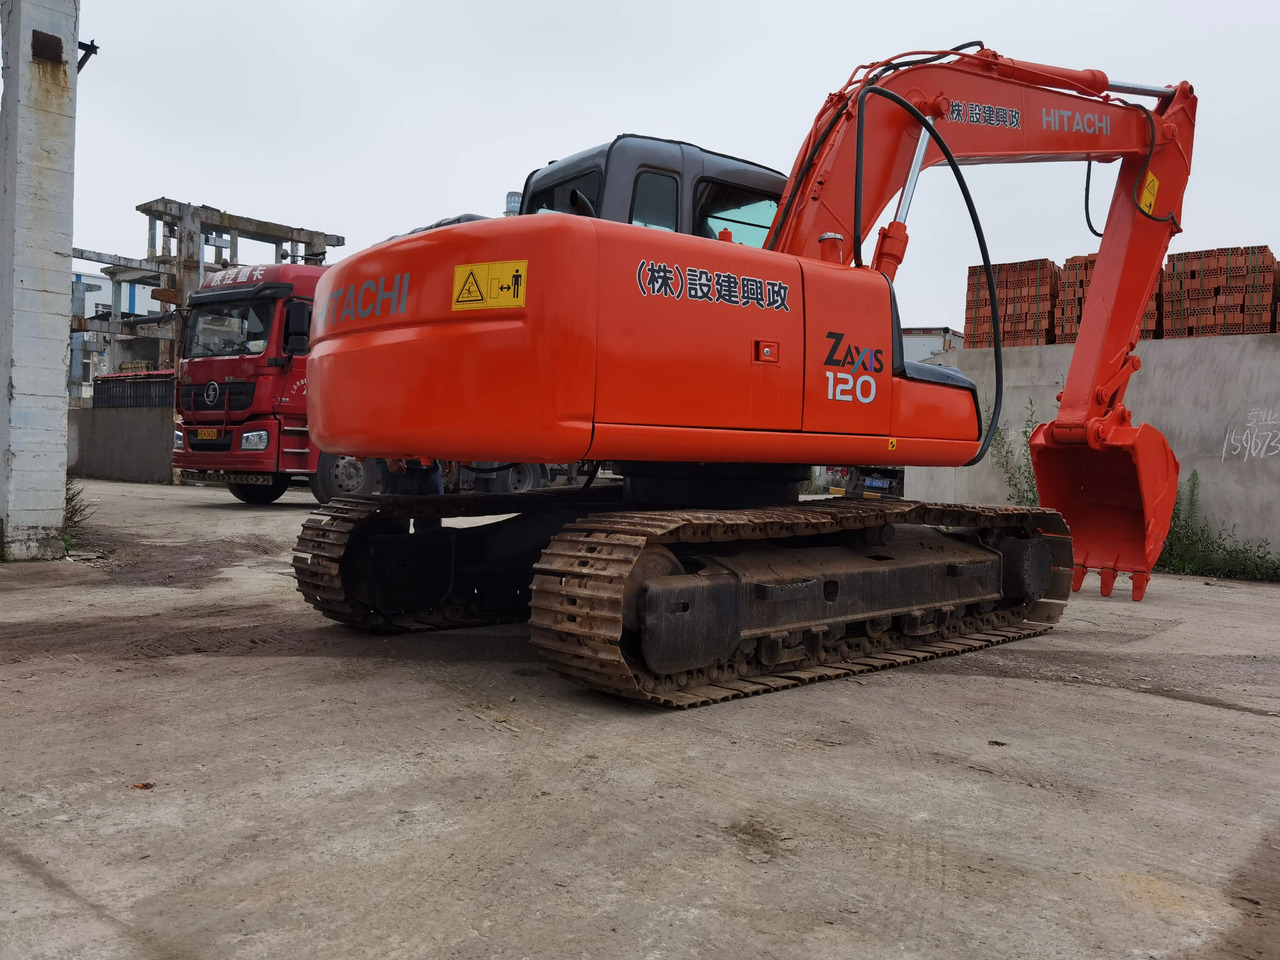 Crawler excavator cheap used hitachi ZX120 excavator used excavators japan used excavator machine in stock now: picture 4